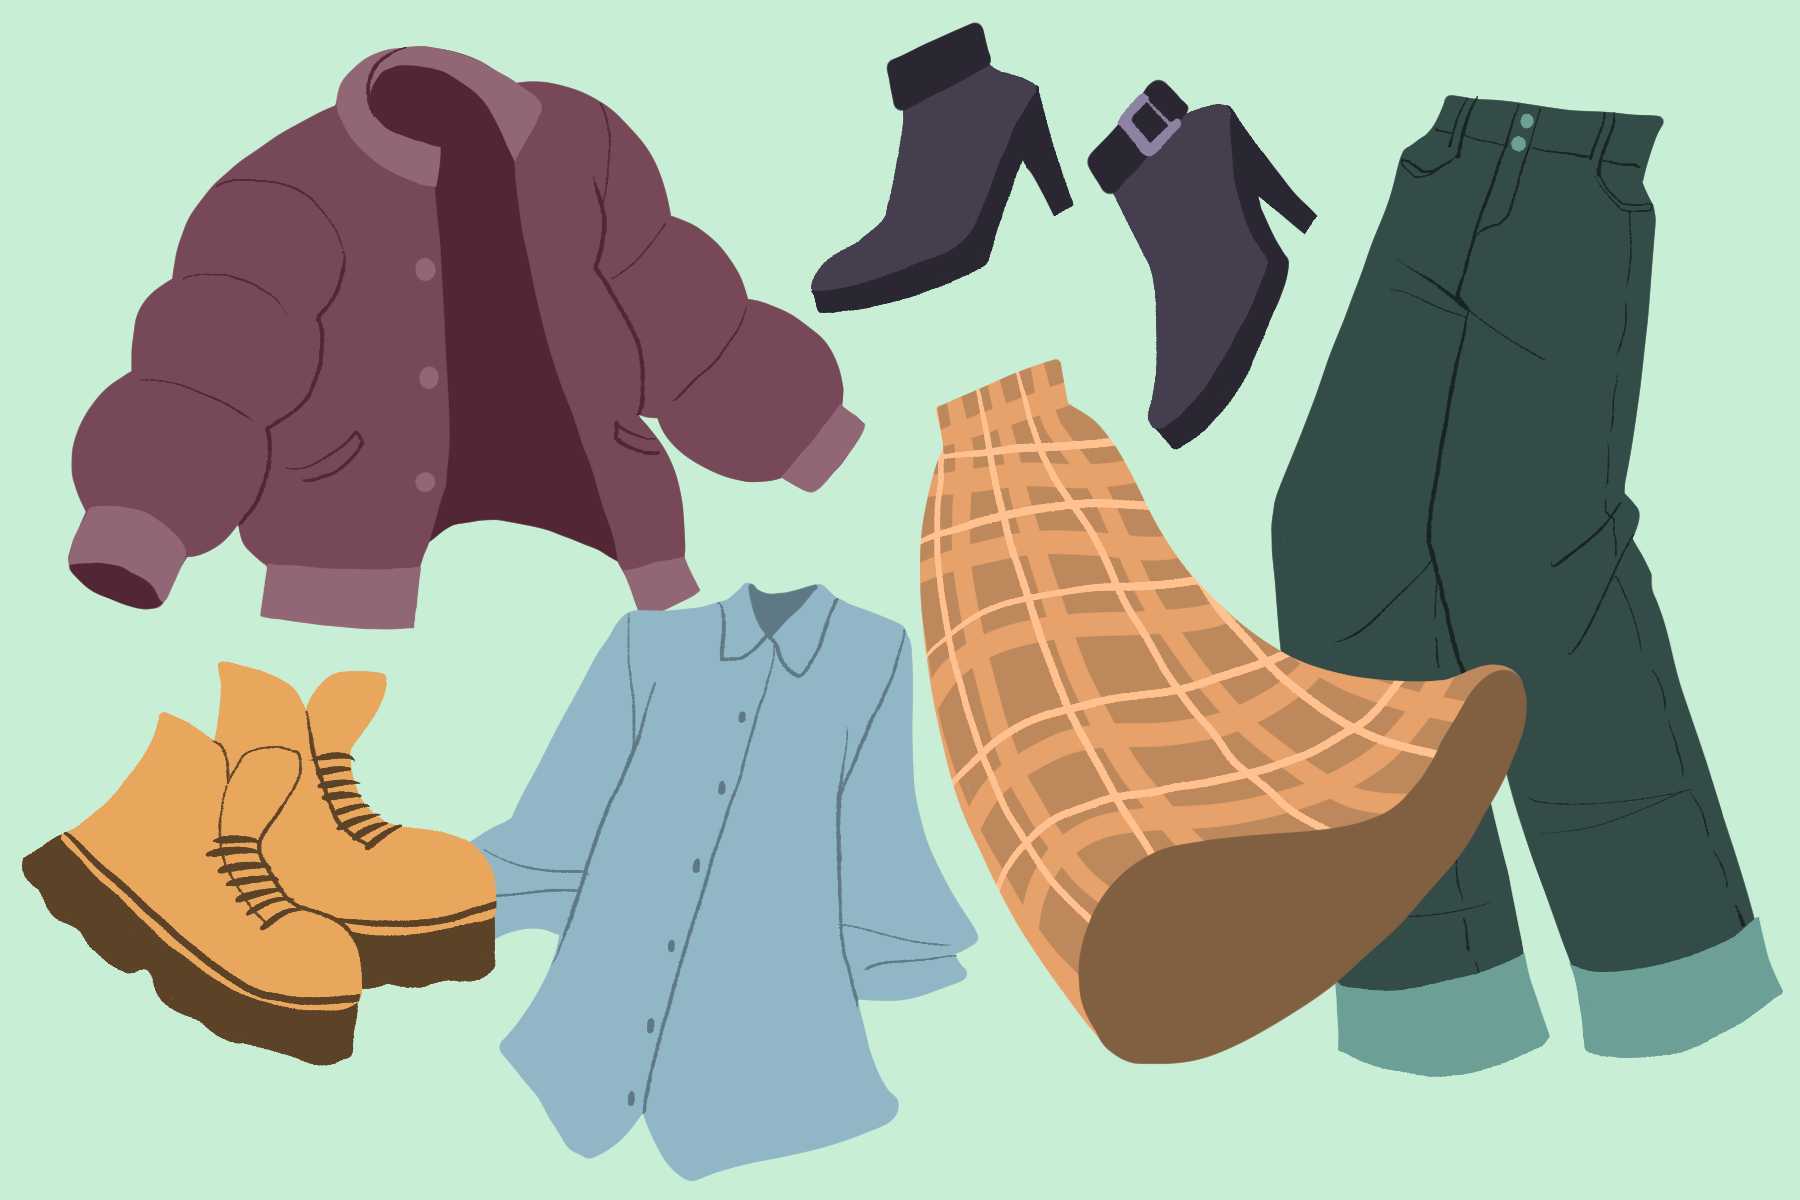 A drawing of fall fashion shows clothes floating against a blue background